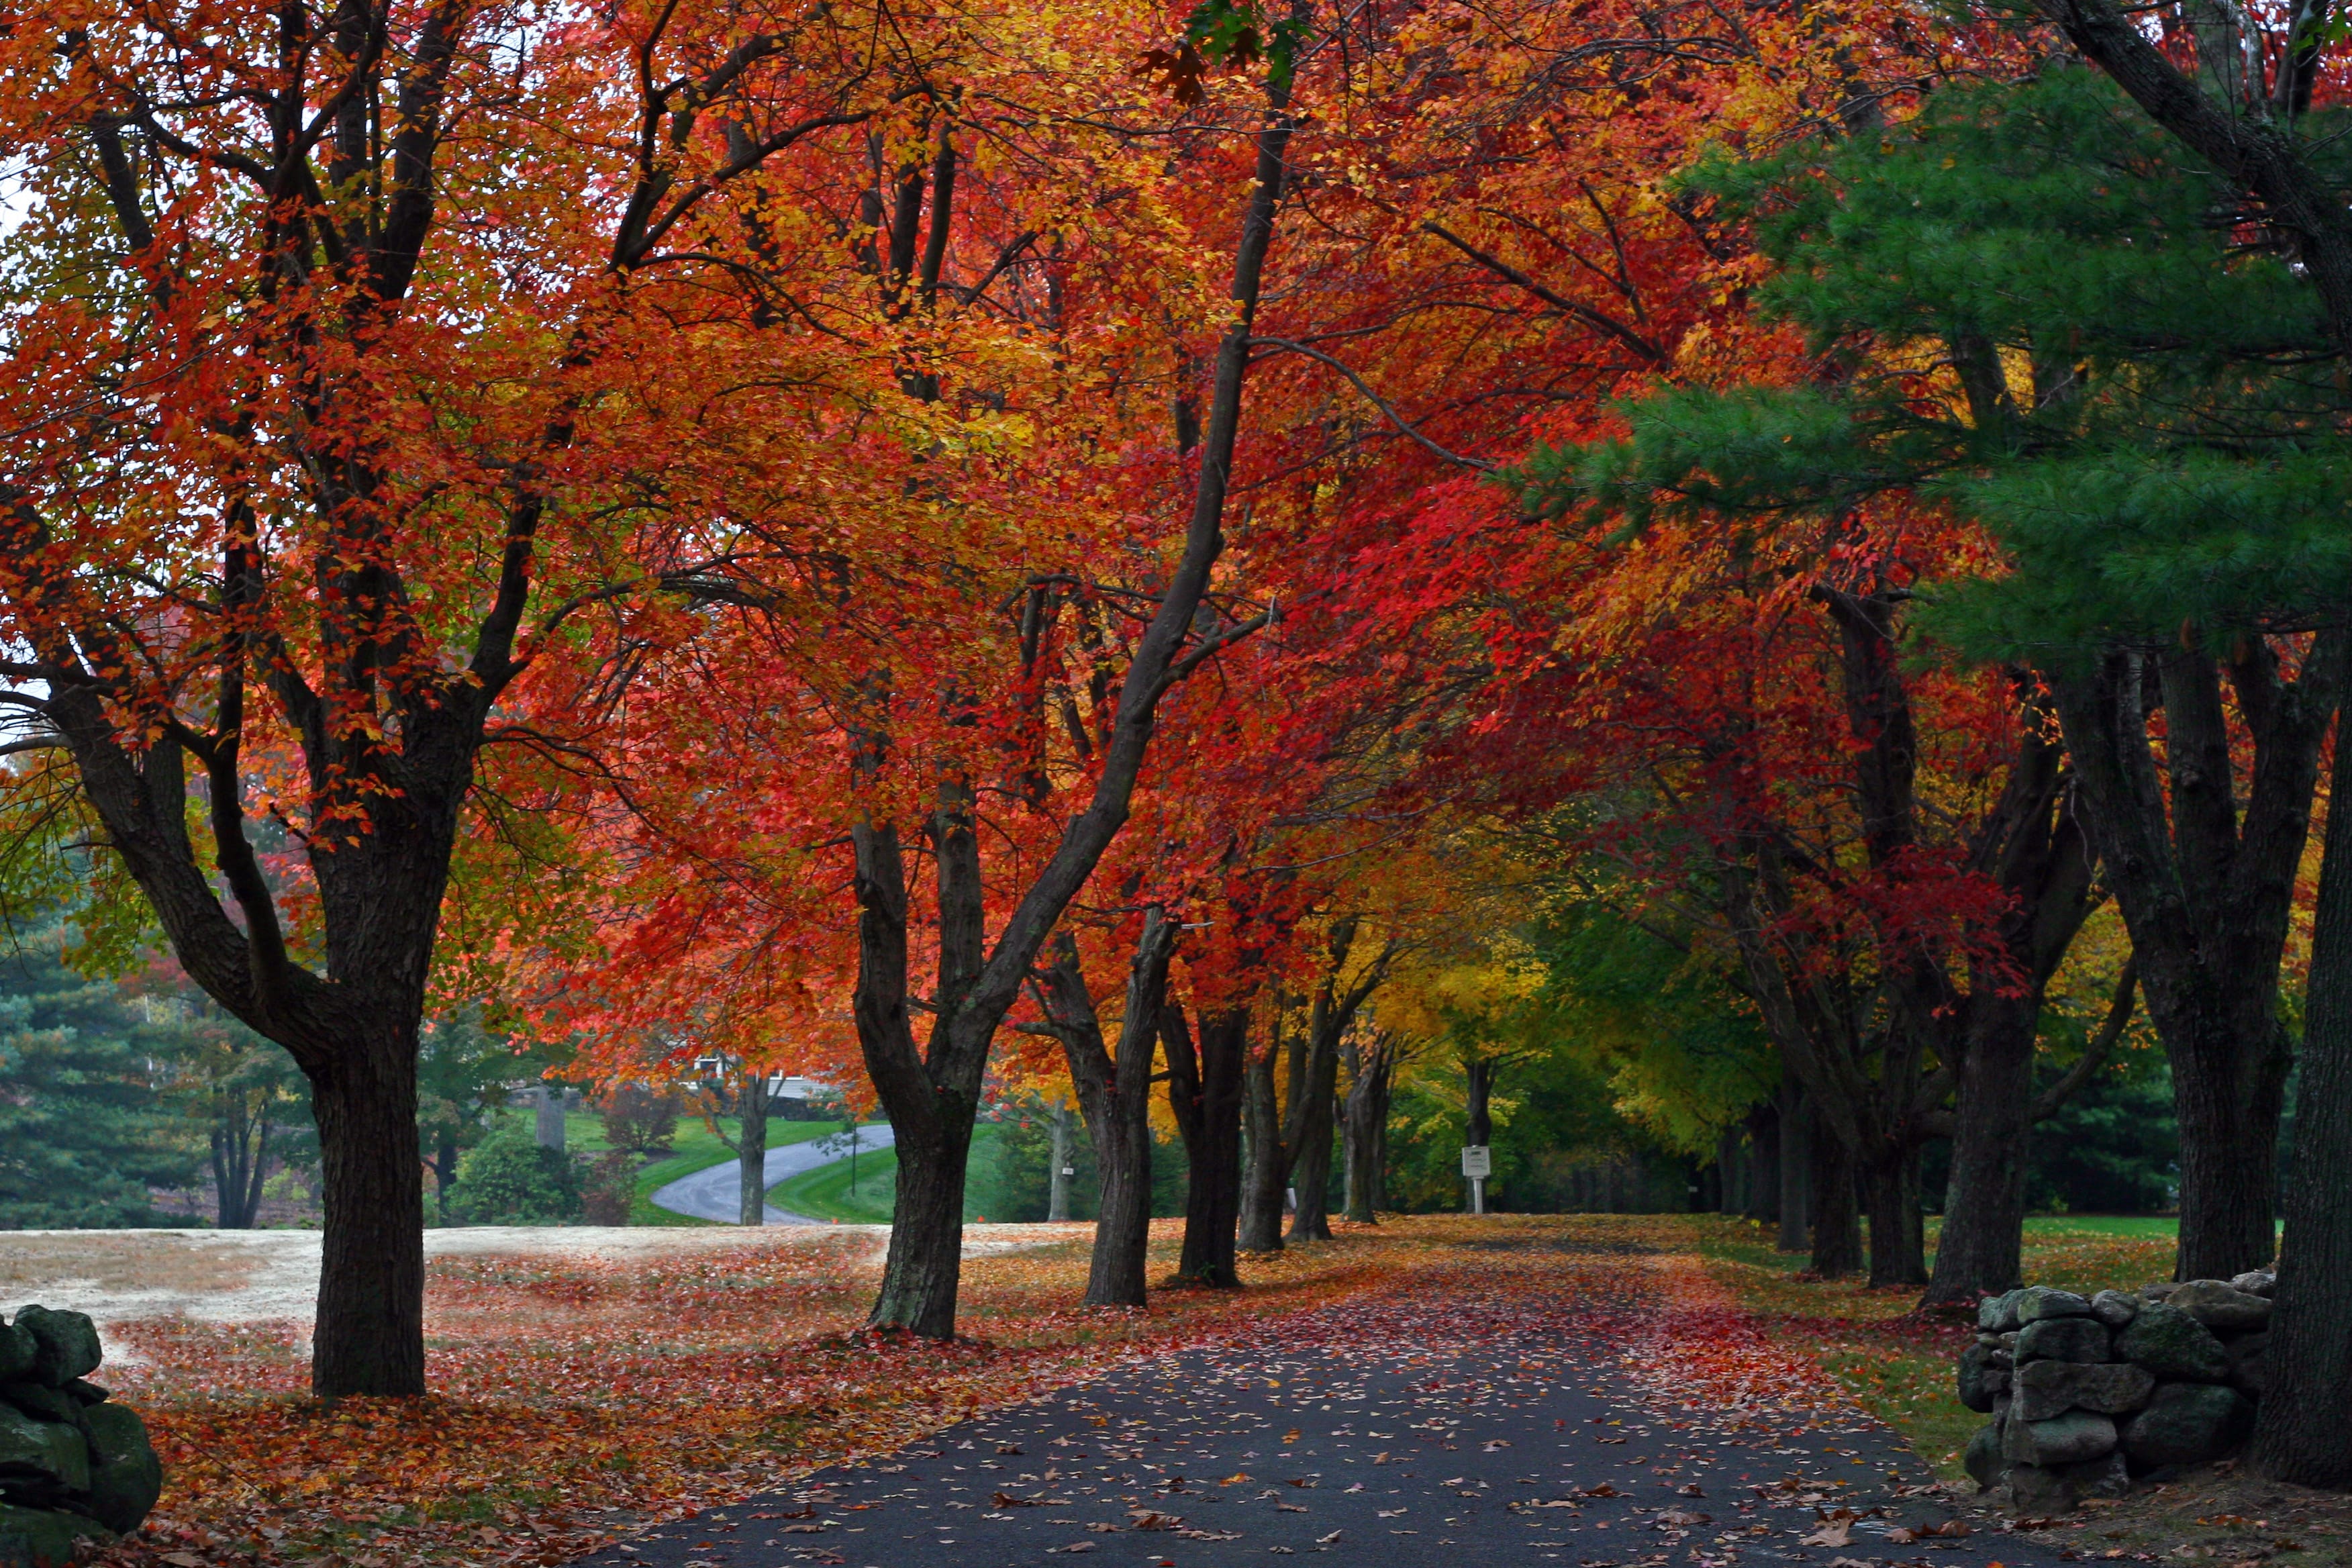 trees with yellow, orange, and red leaves